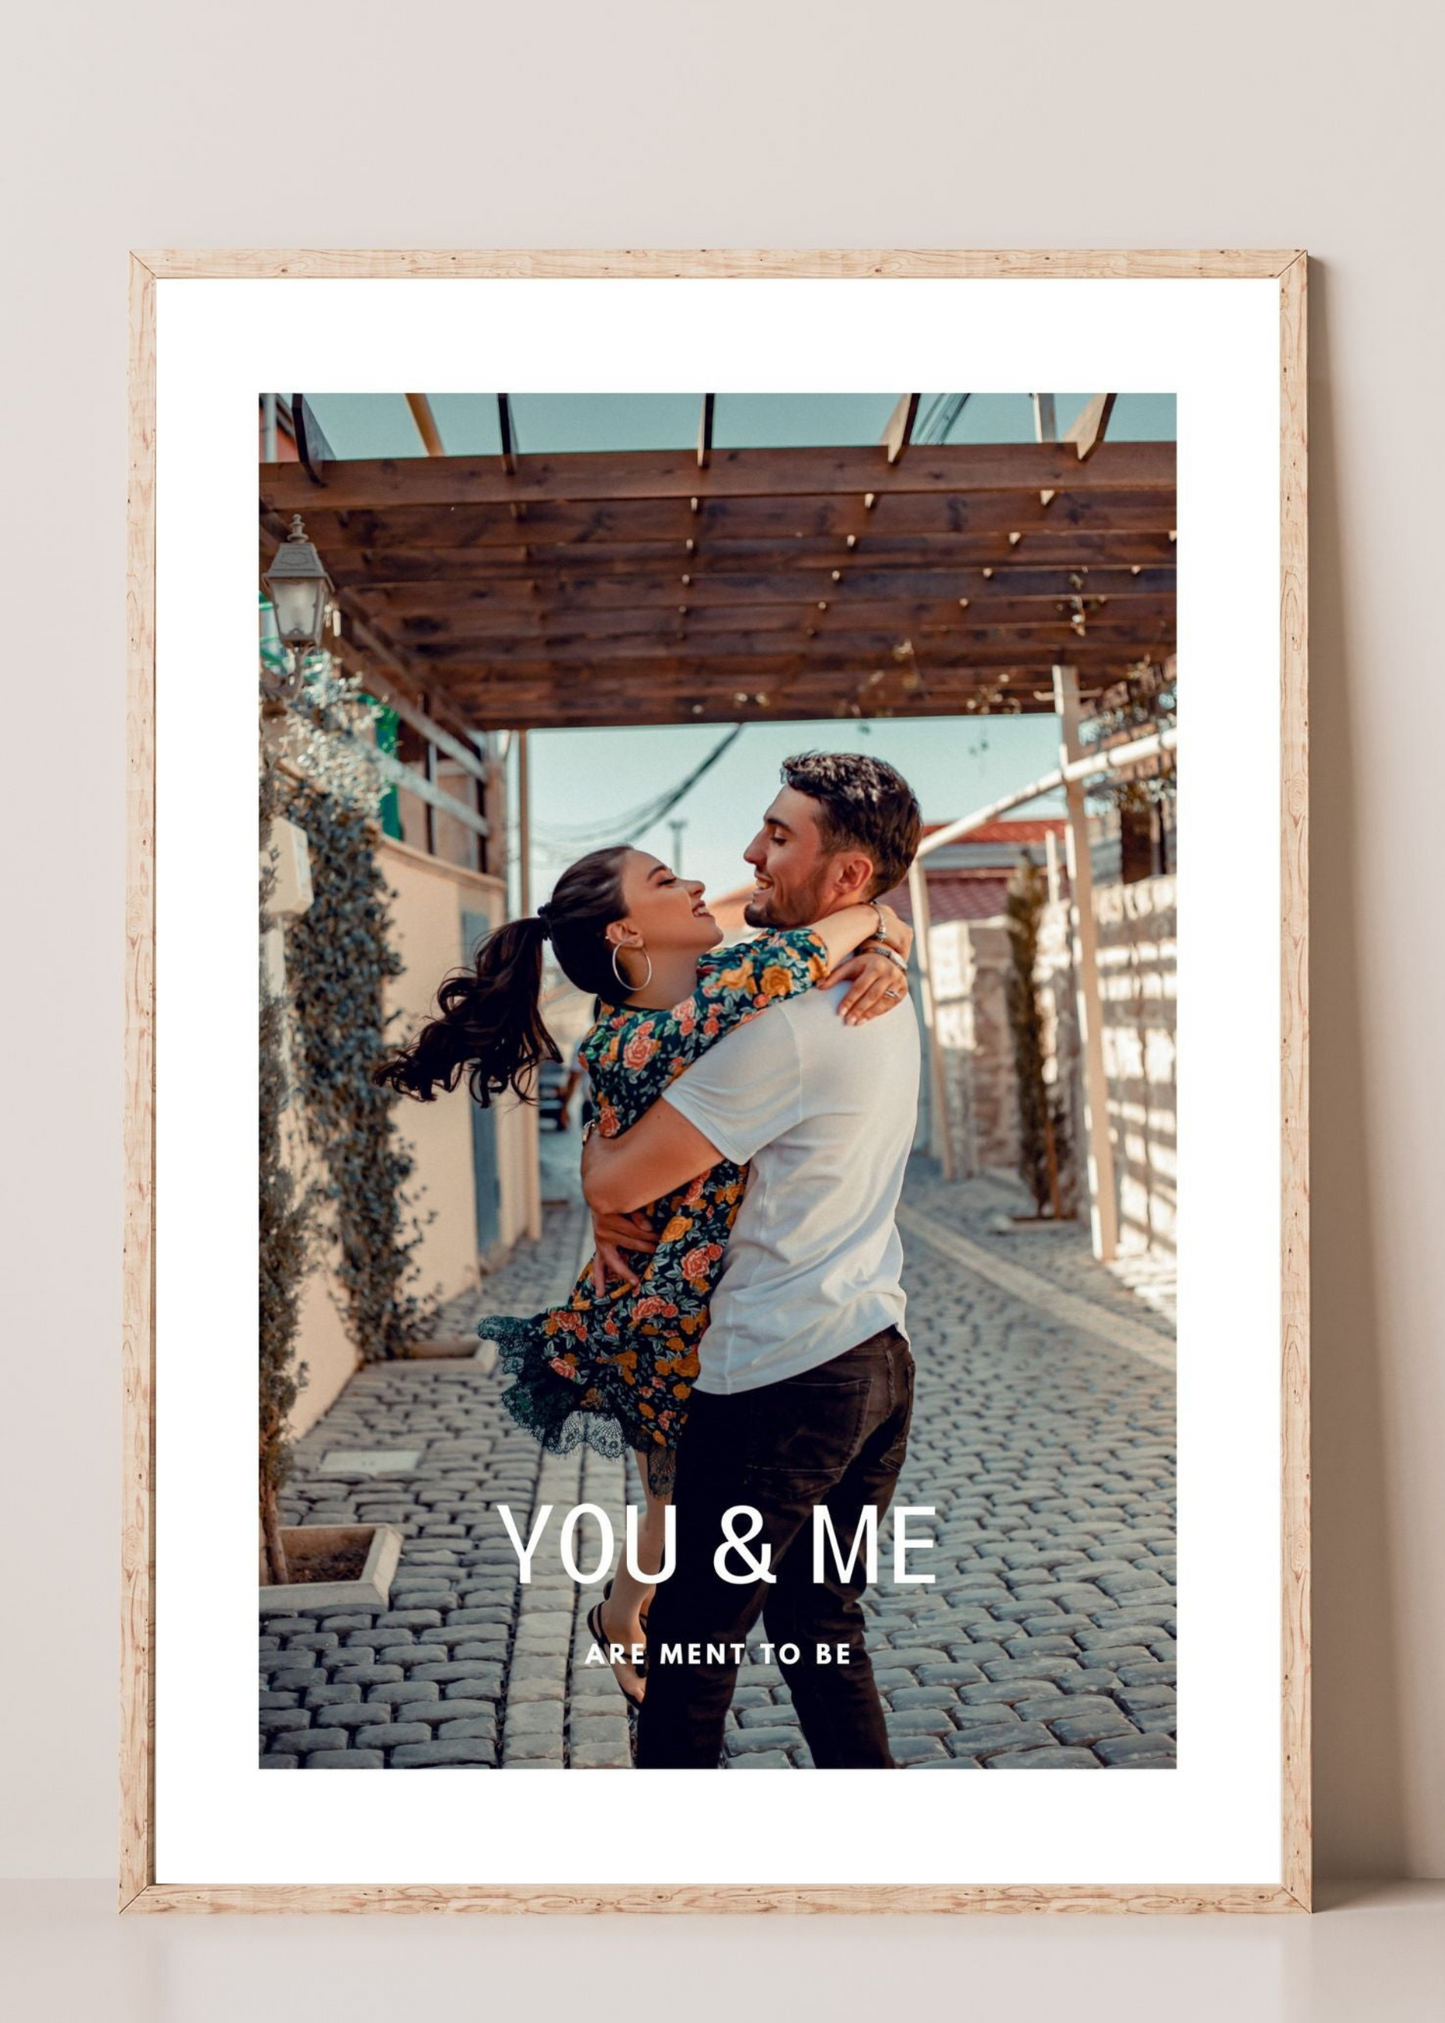 Framkalla; med text "You & me - are ment to be" Poster